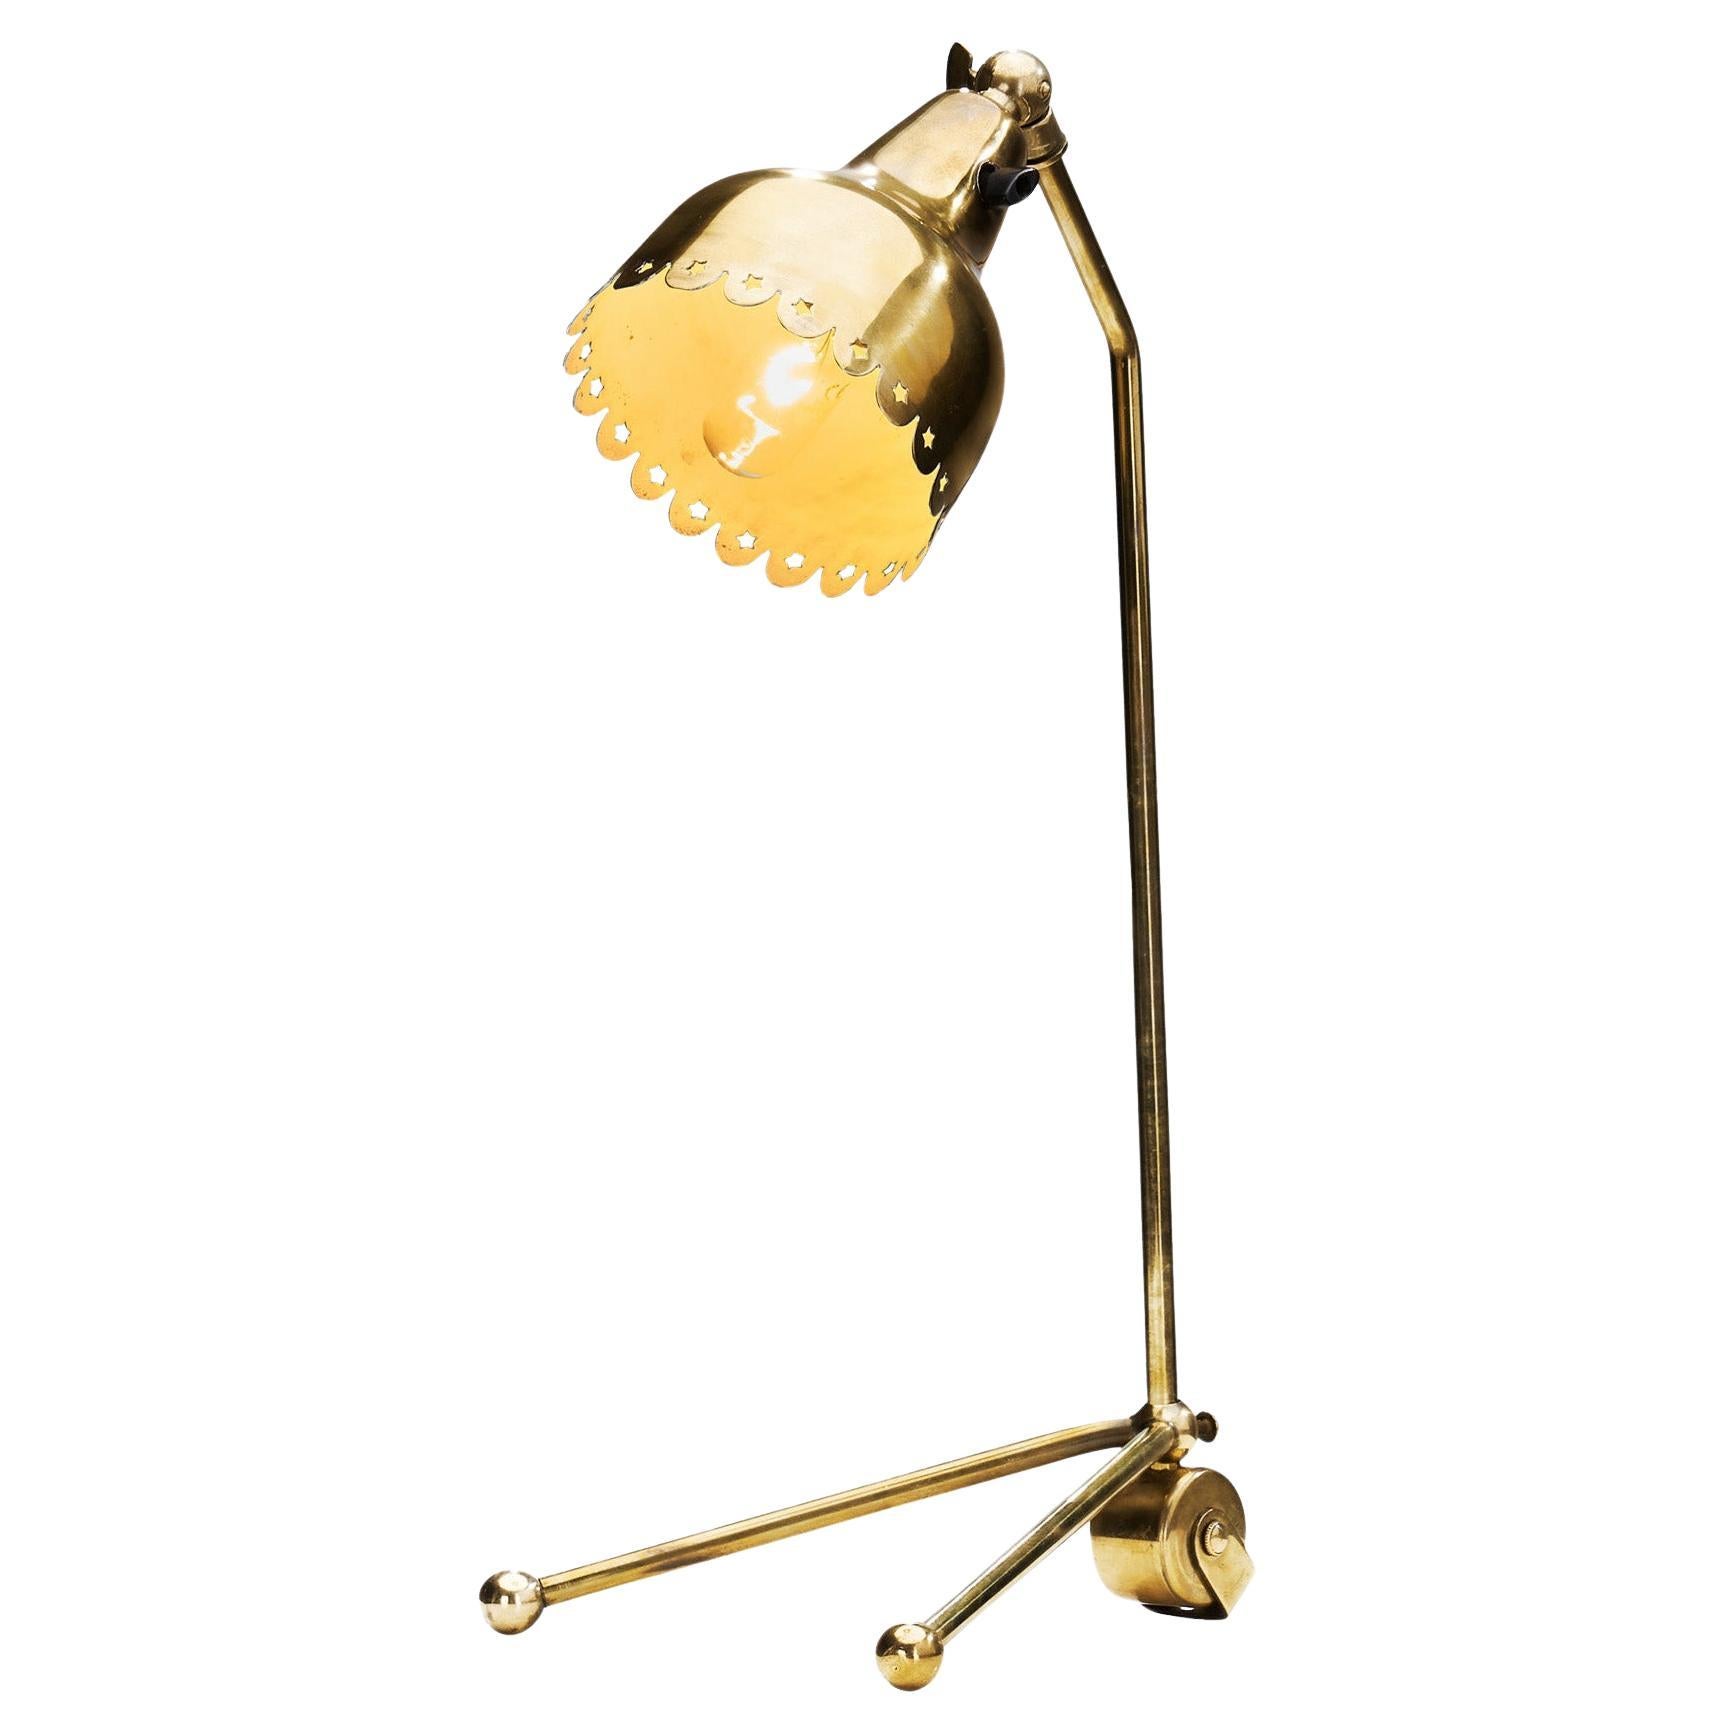 Brass Table Lamp with Adjustable, Perforated Shade and Base, Europe ca 1950s For Sale